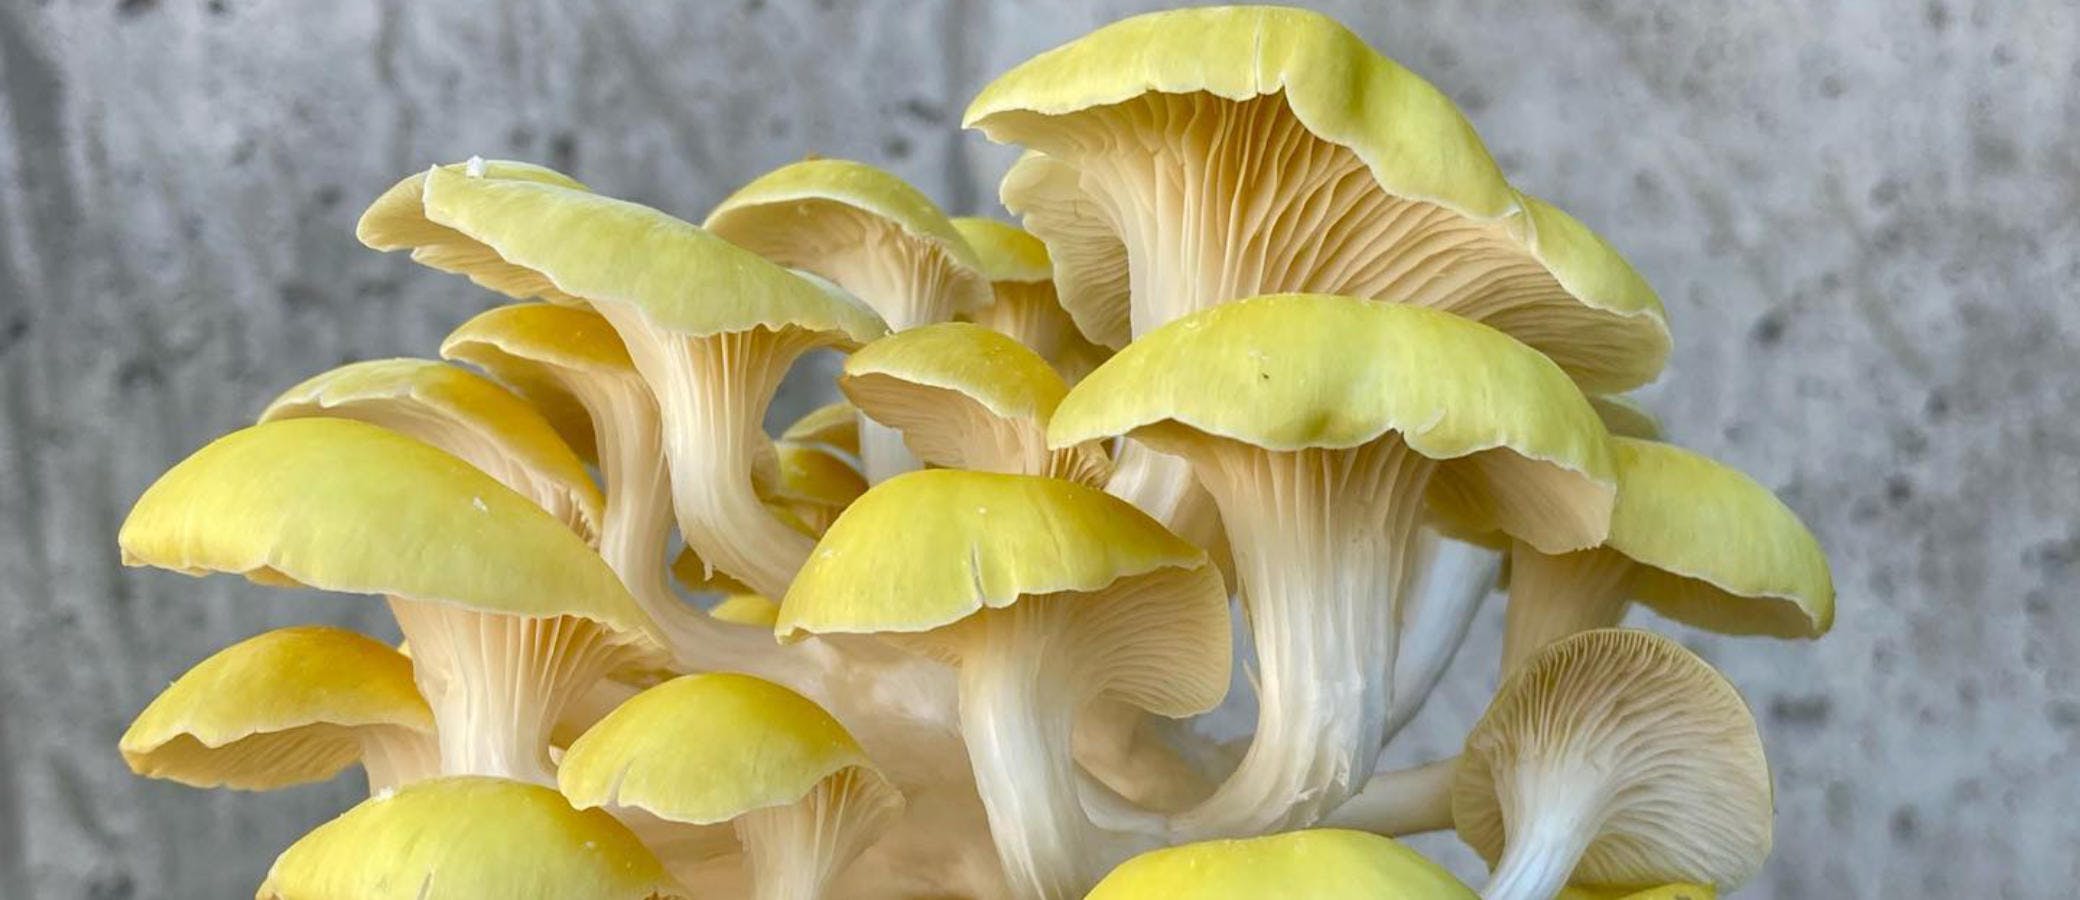 Image of a yellow oyster mushroom brunch